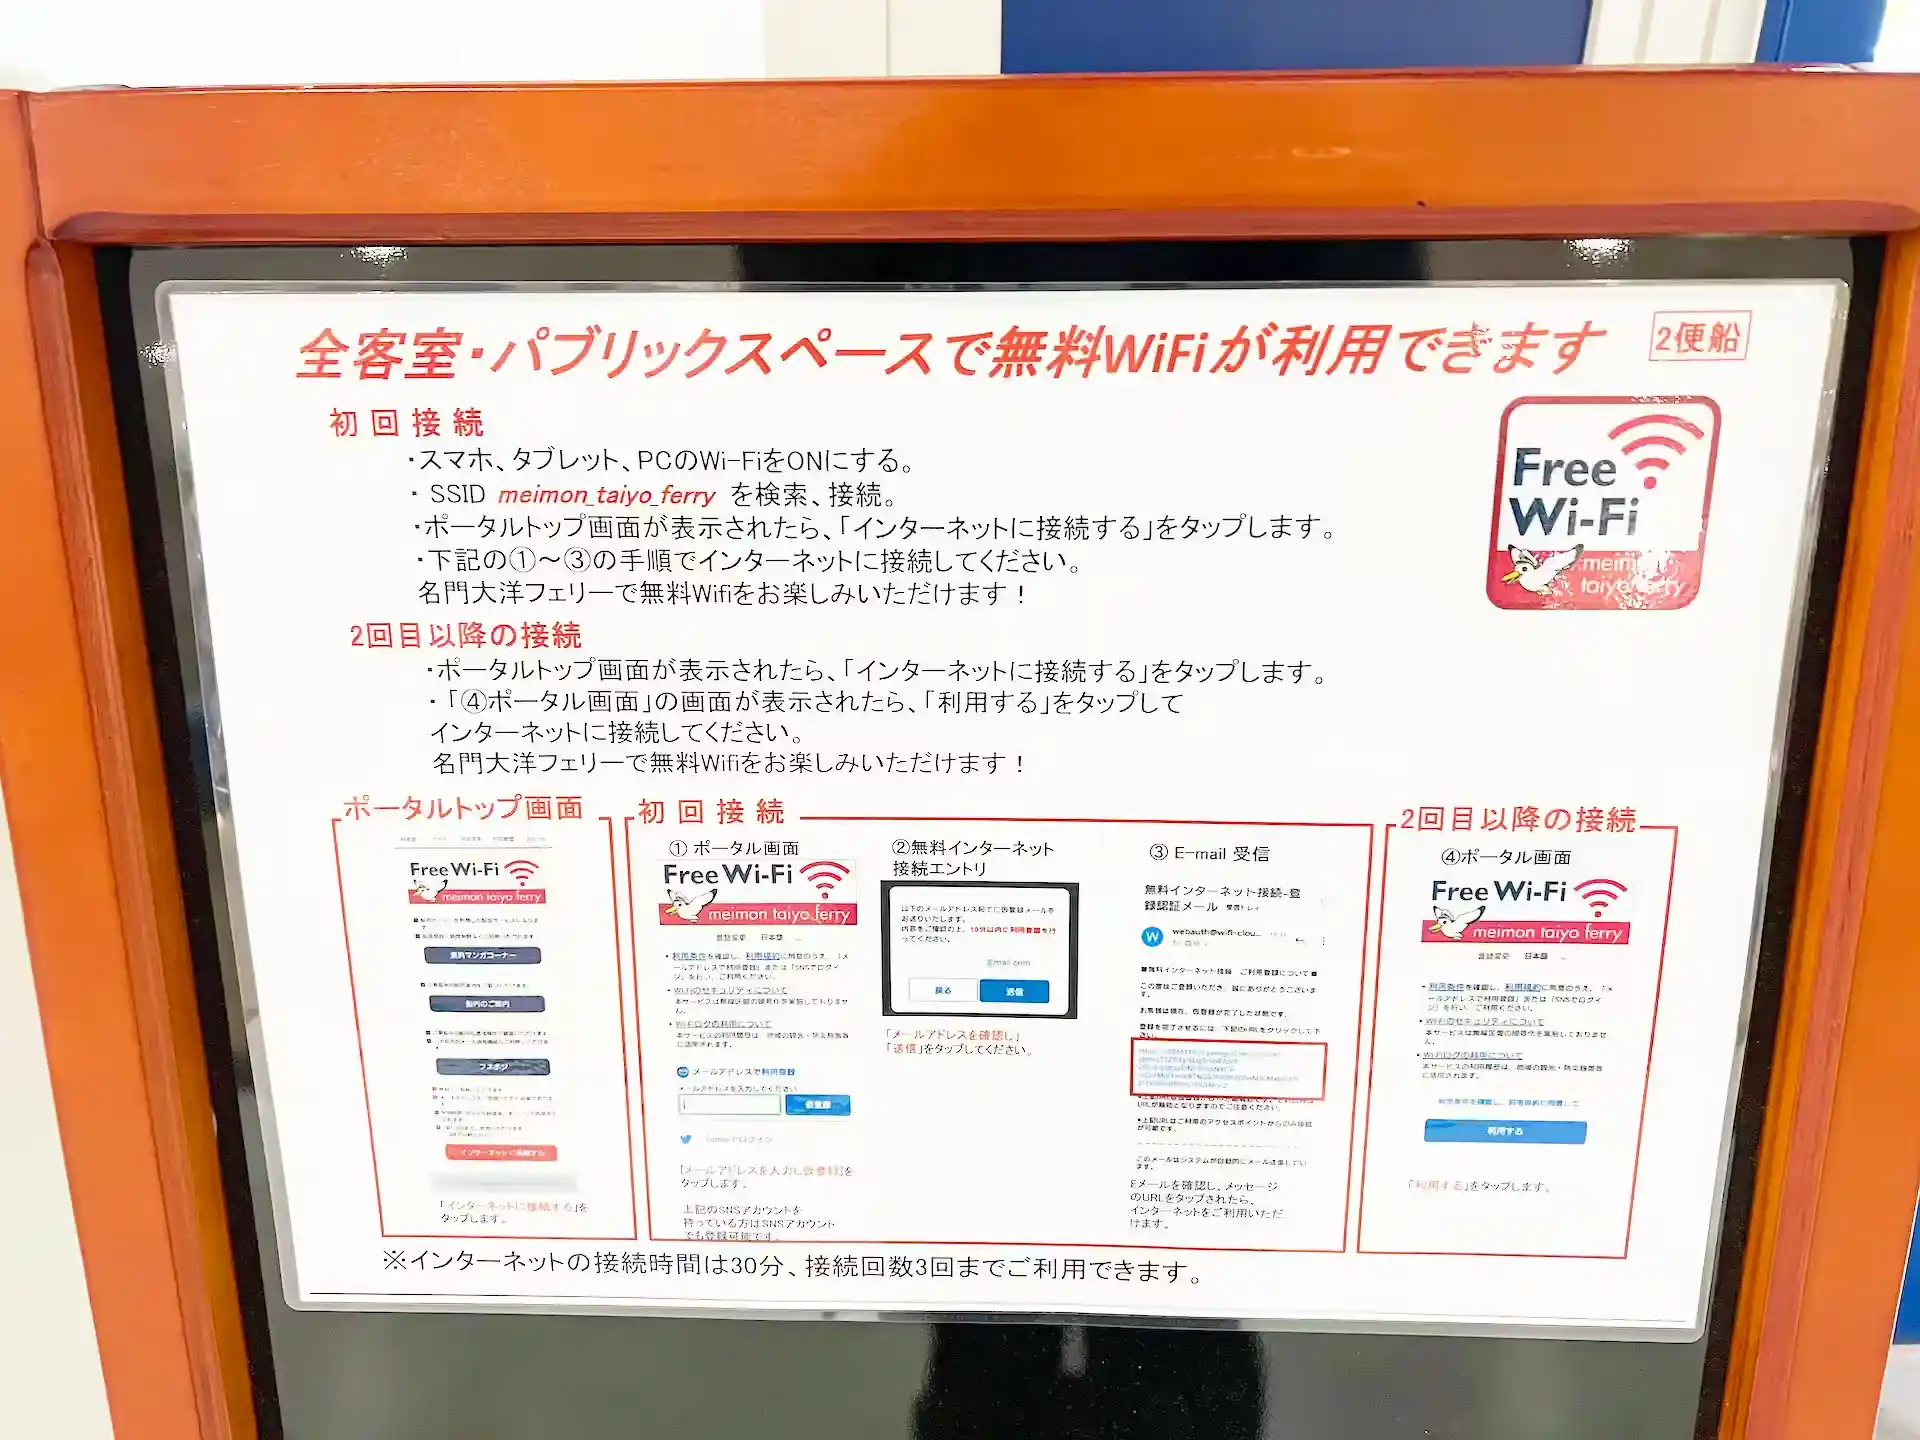 A paper with instructions on how to use the free Wi-Fi on board Meimon Taiyo Ferry Kyoto.